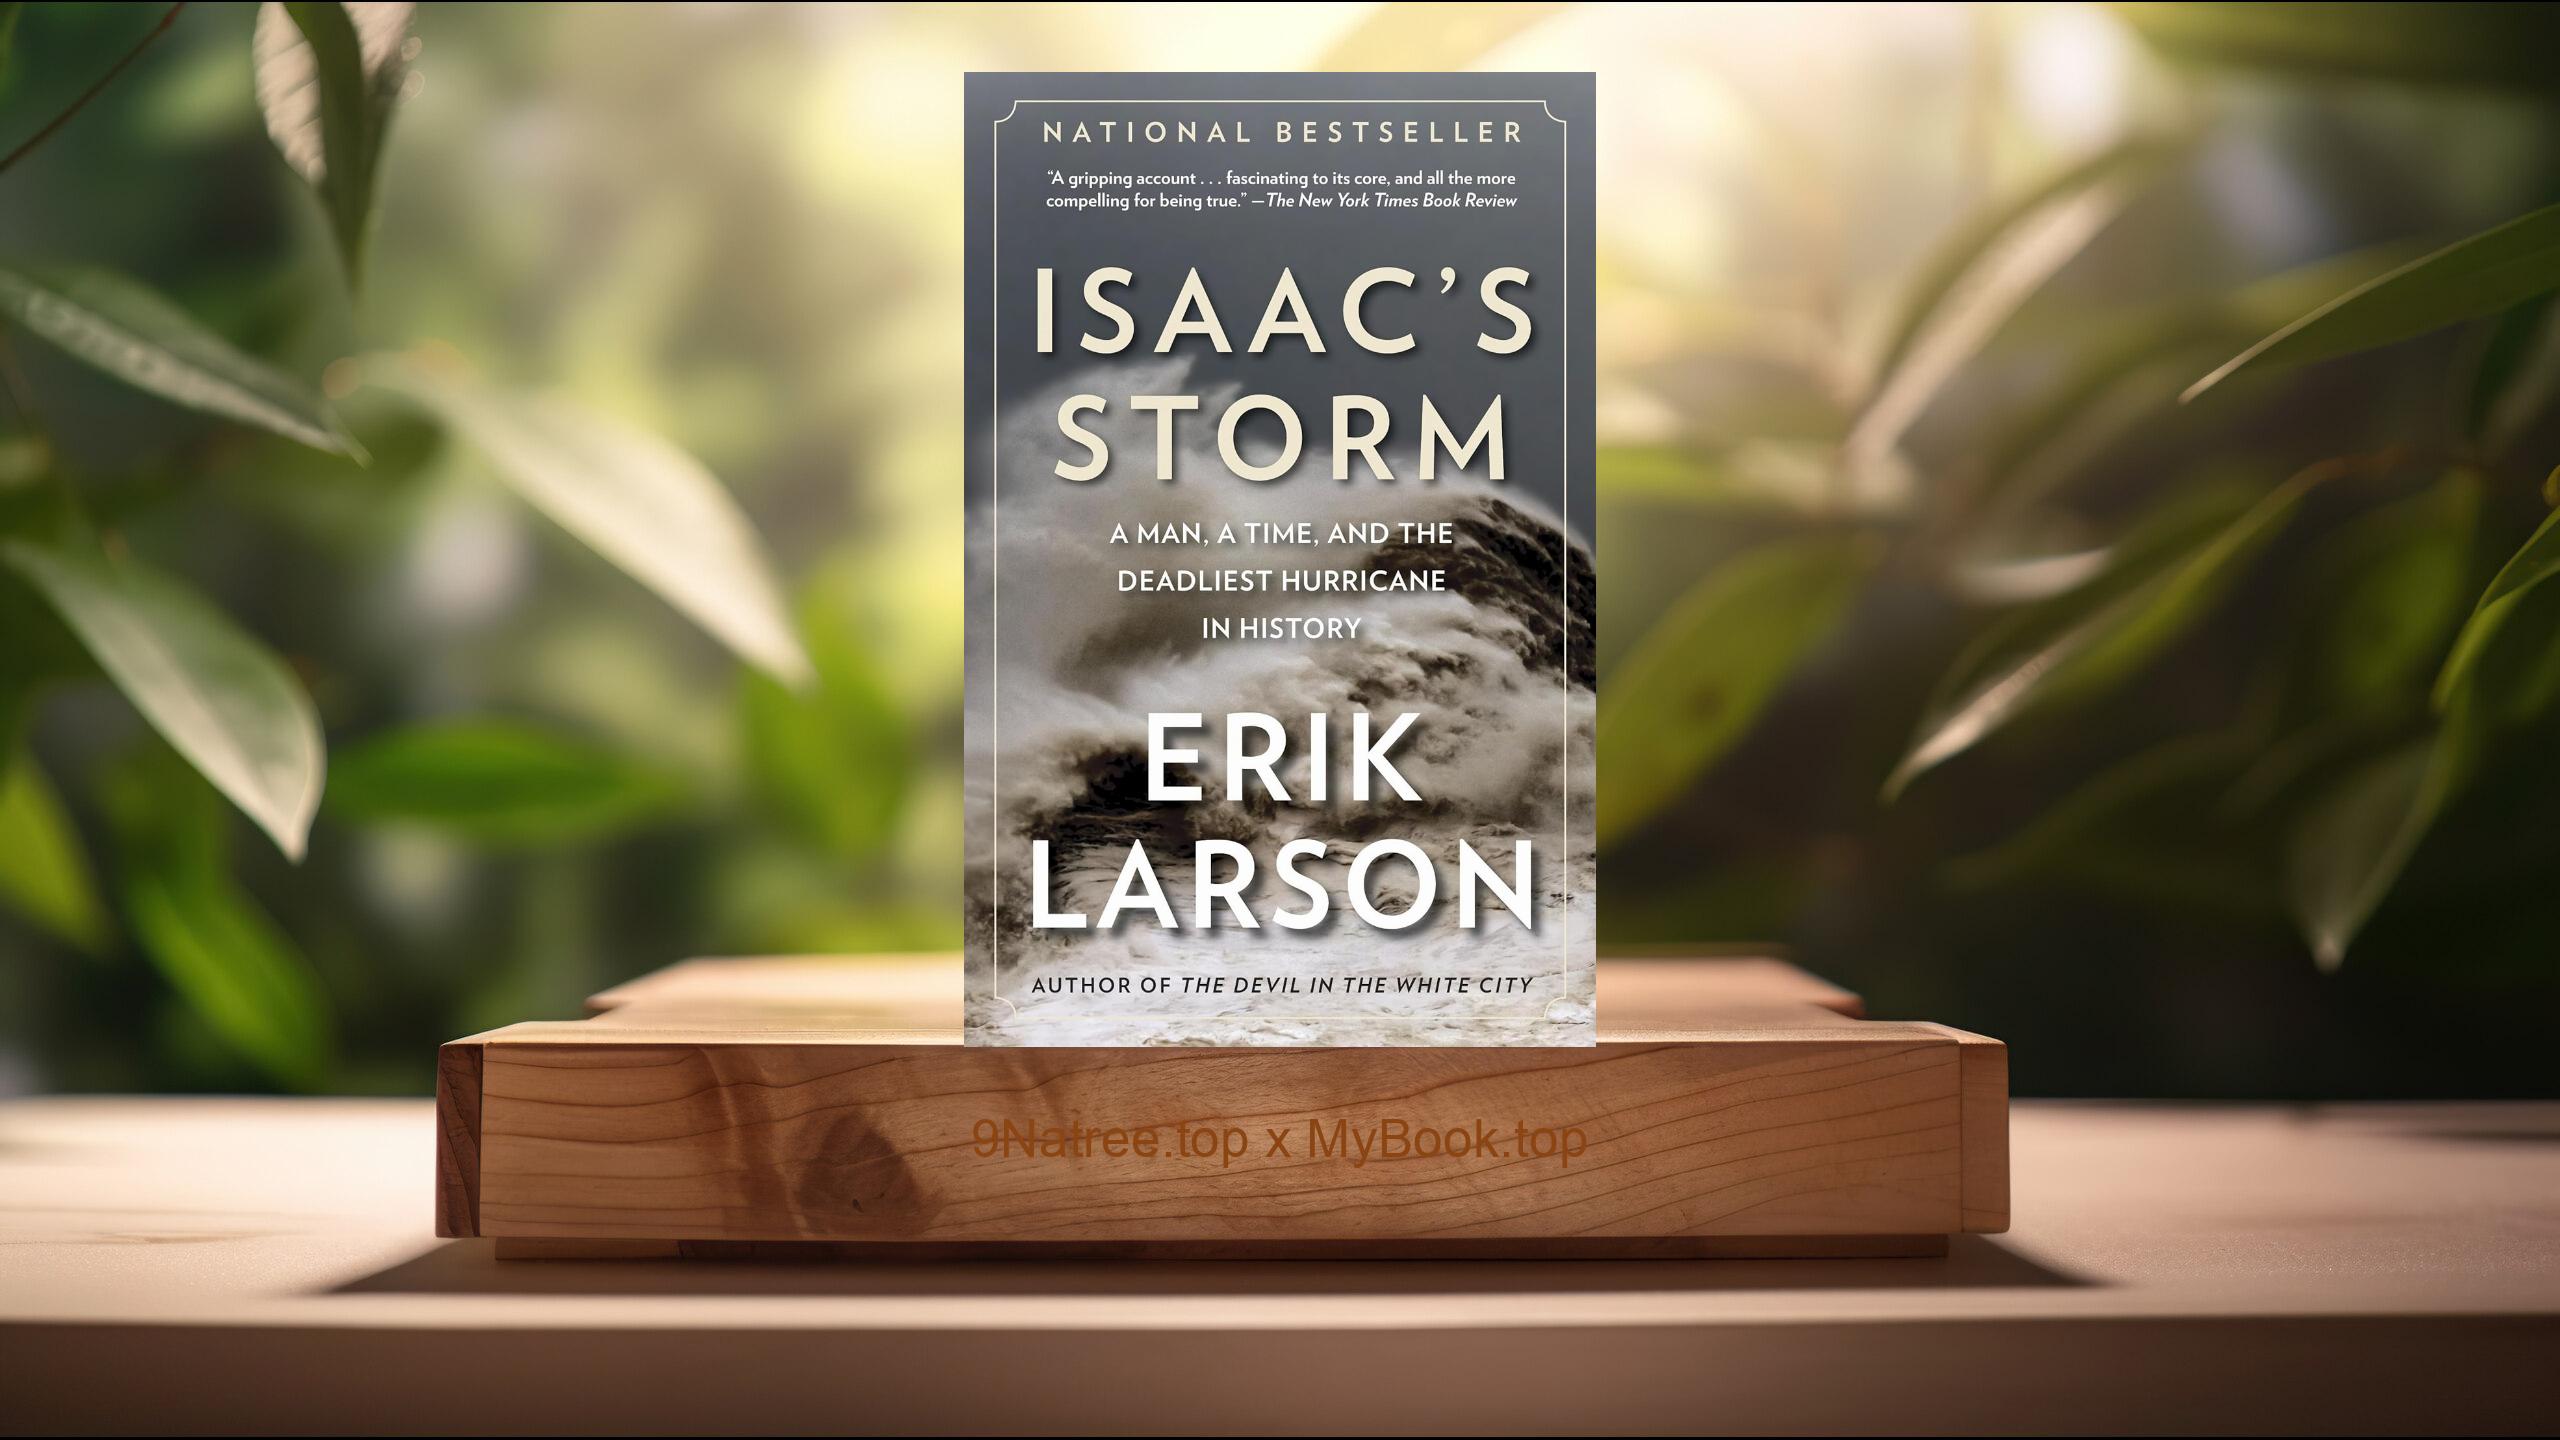 [Review] Isaac's Storm: A Man, a Time, and the Deadliest Hurricane in History (Erik Larson) Summarized